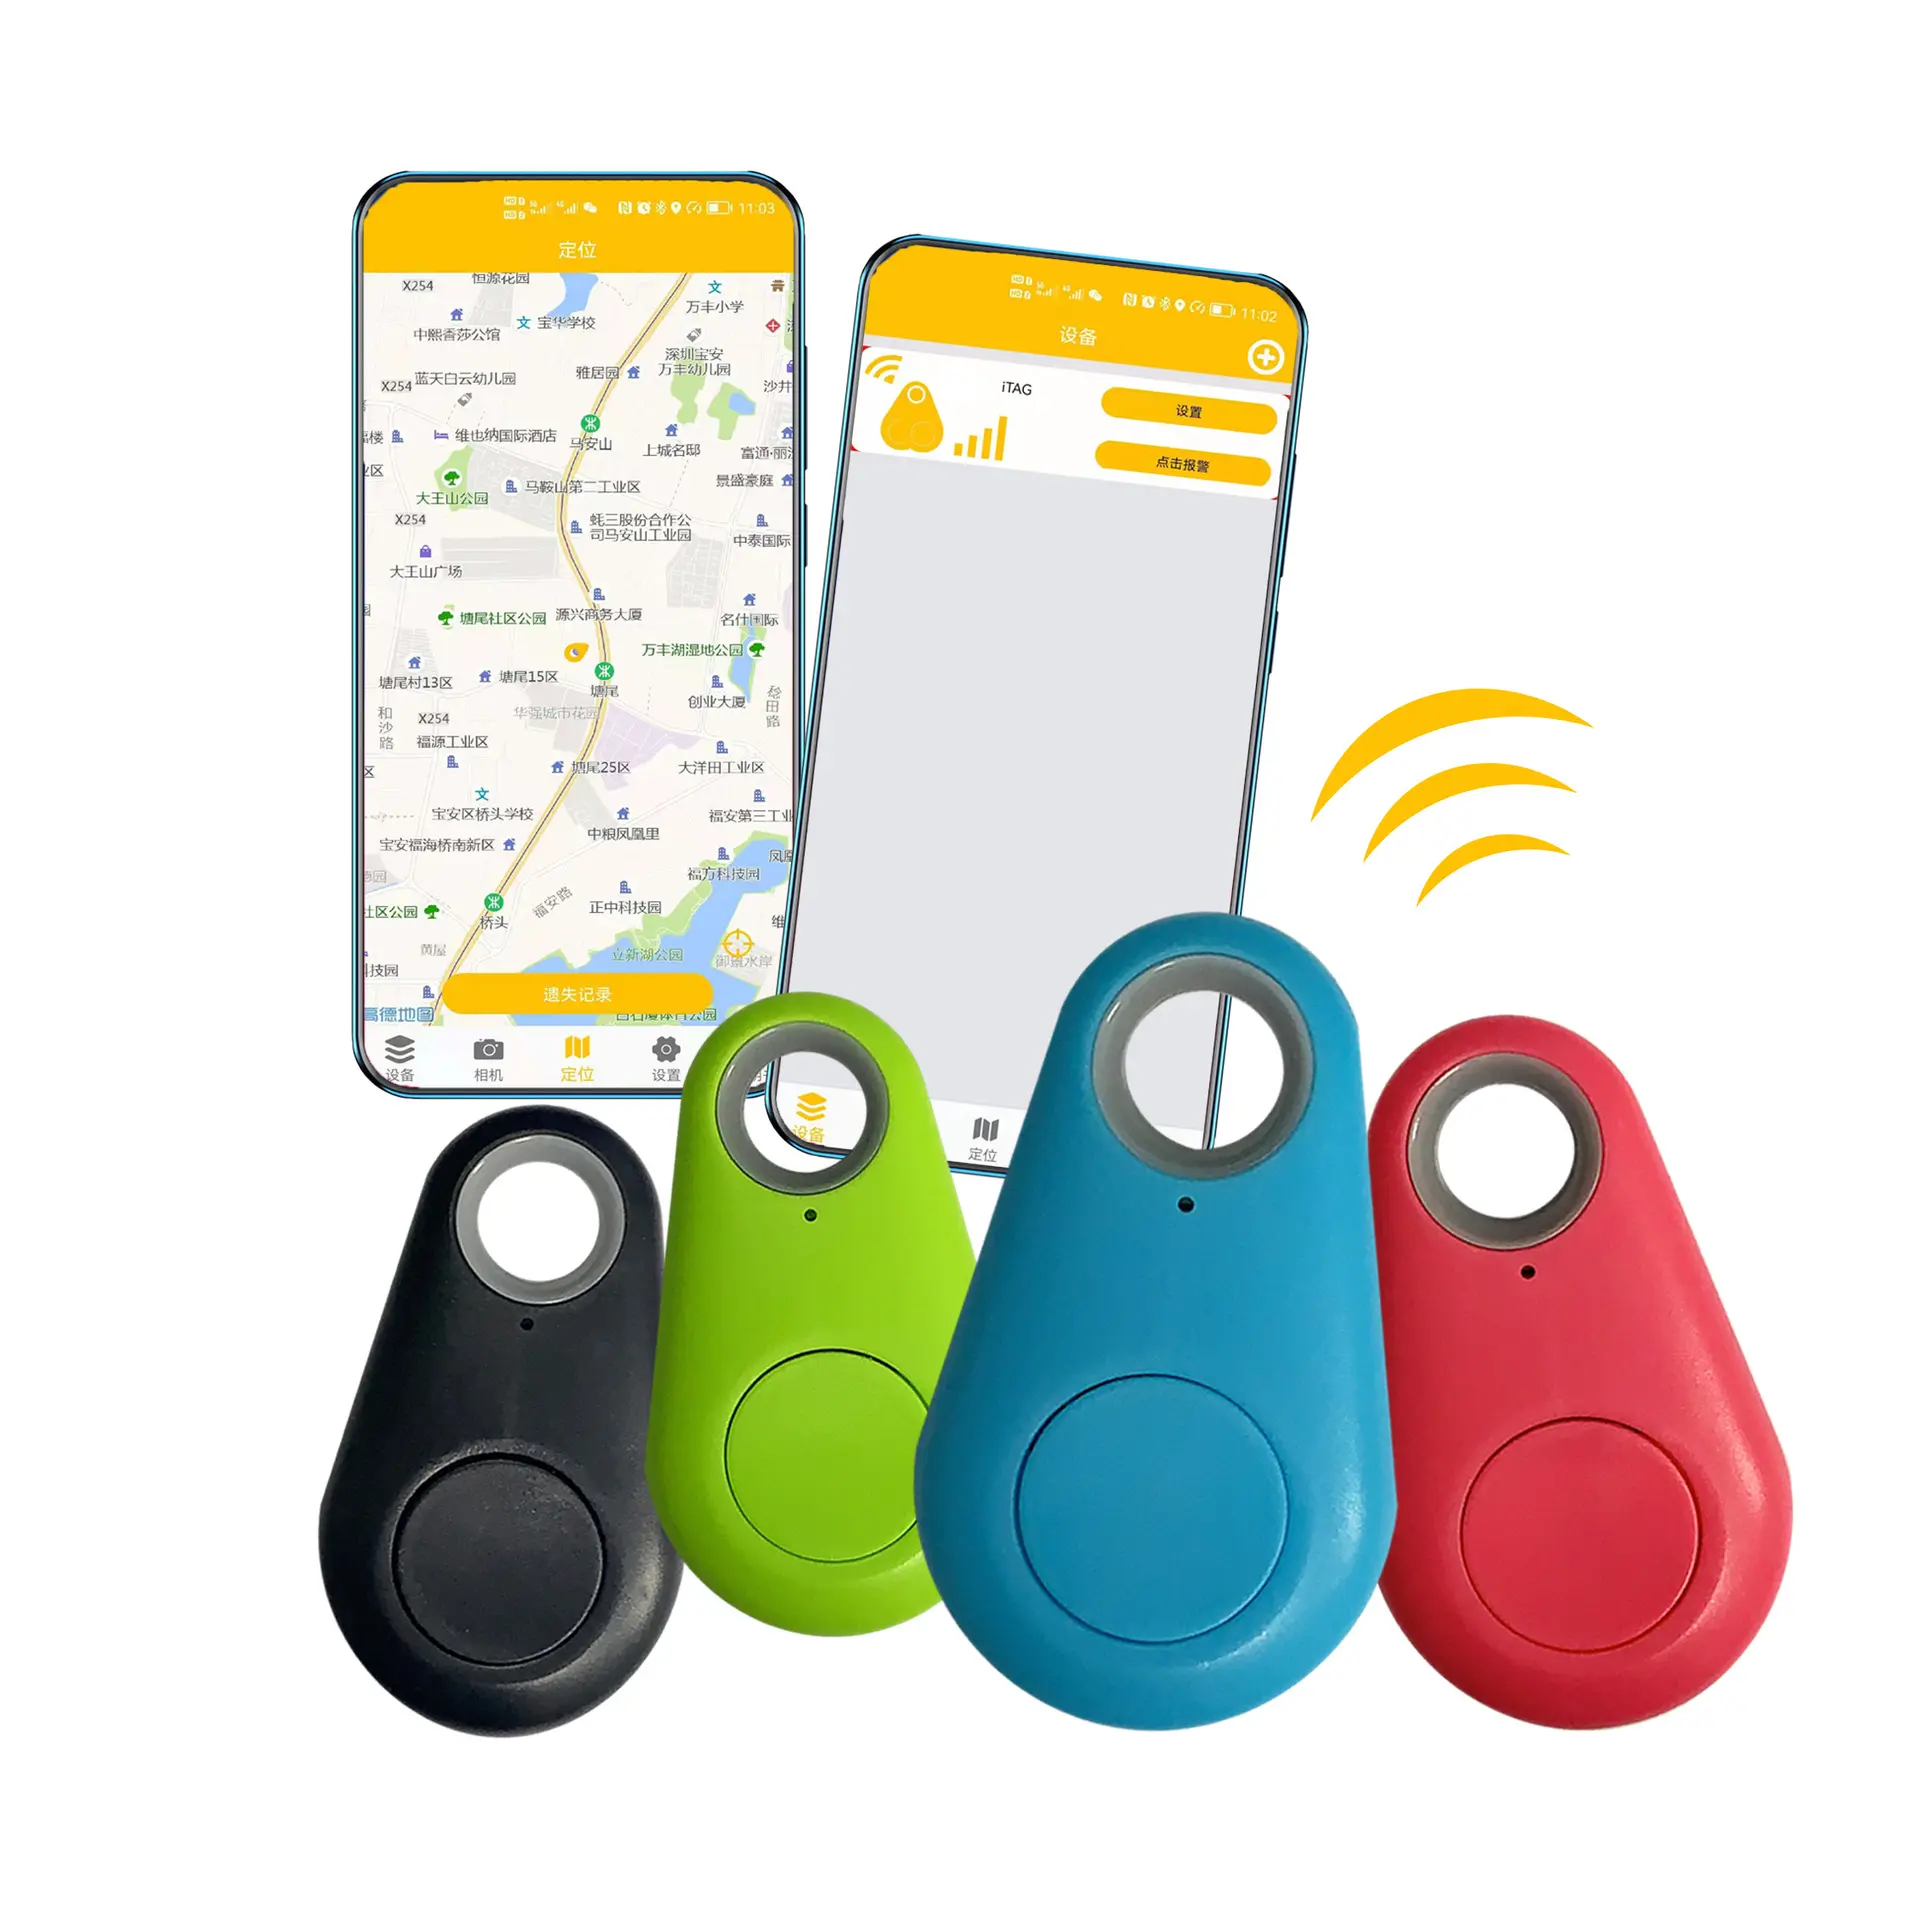 Wholesale Certified Key Finder Pet locator Satellite real-time tracking GPS tracker Apple found me